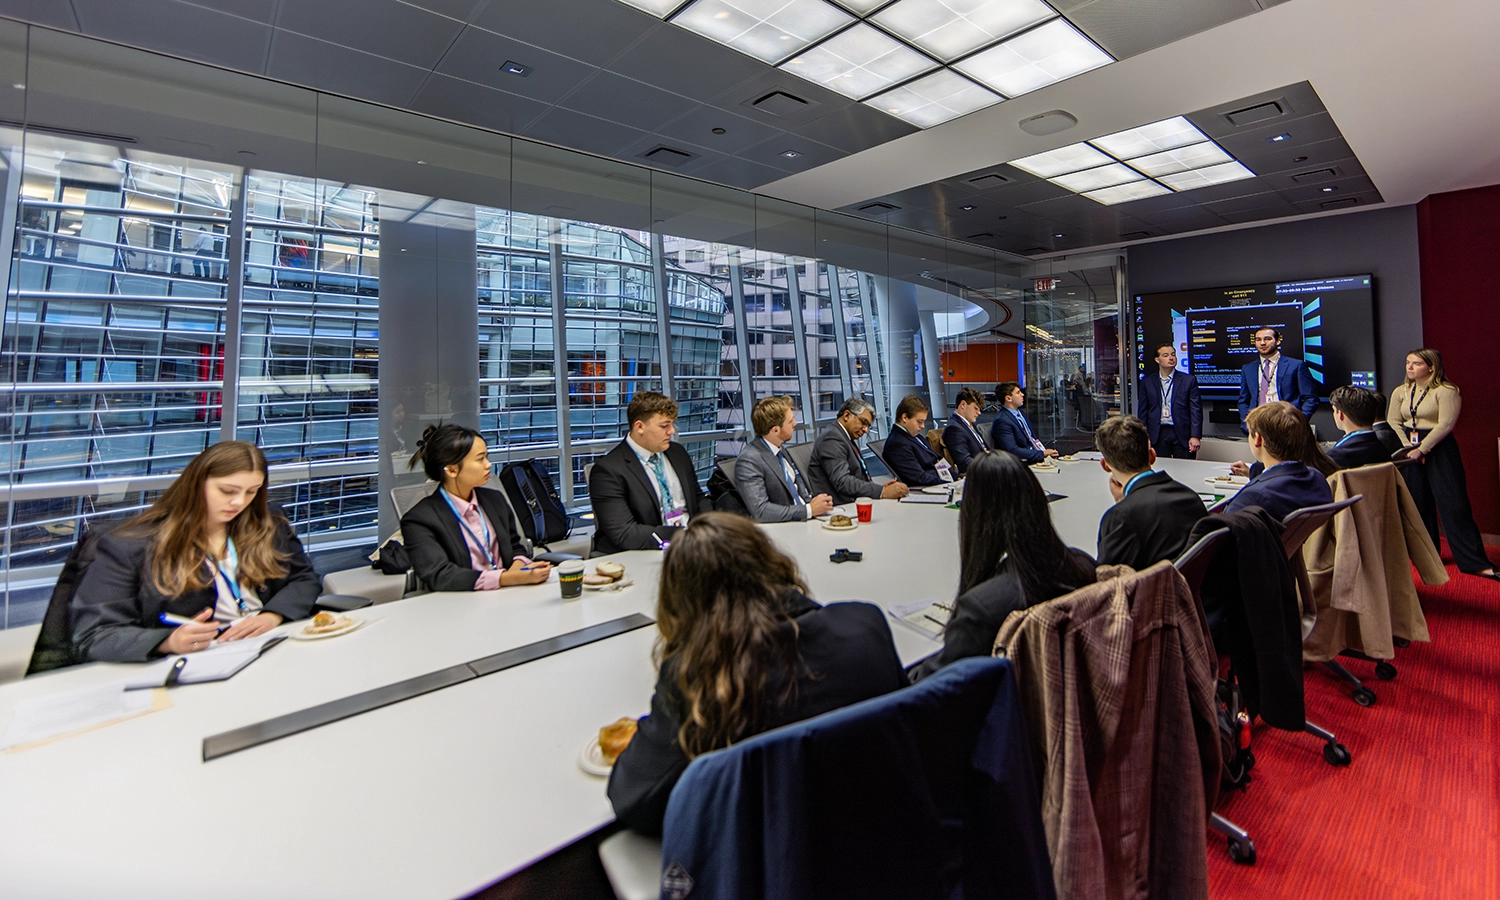 At Bloomberg in Midtown Manhattan, students and Professor of Economics Feisal Khan hear from Matthew Fox ’19, Joseph Gibbons ’14 and Kelsie Worth ’22 about their careers at the financial software company.